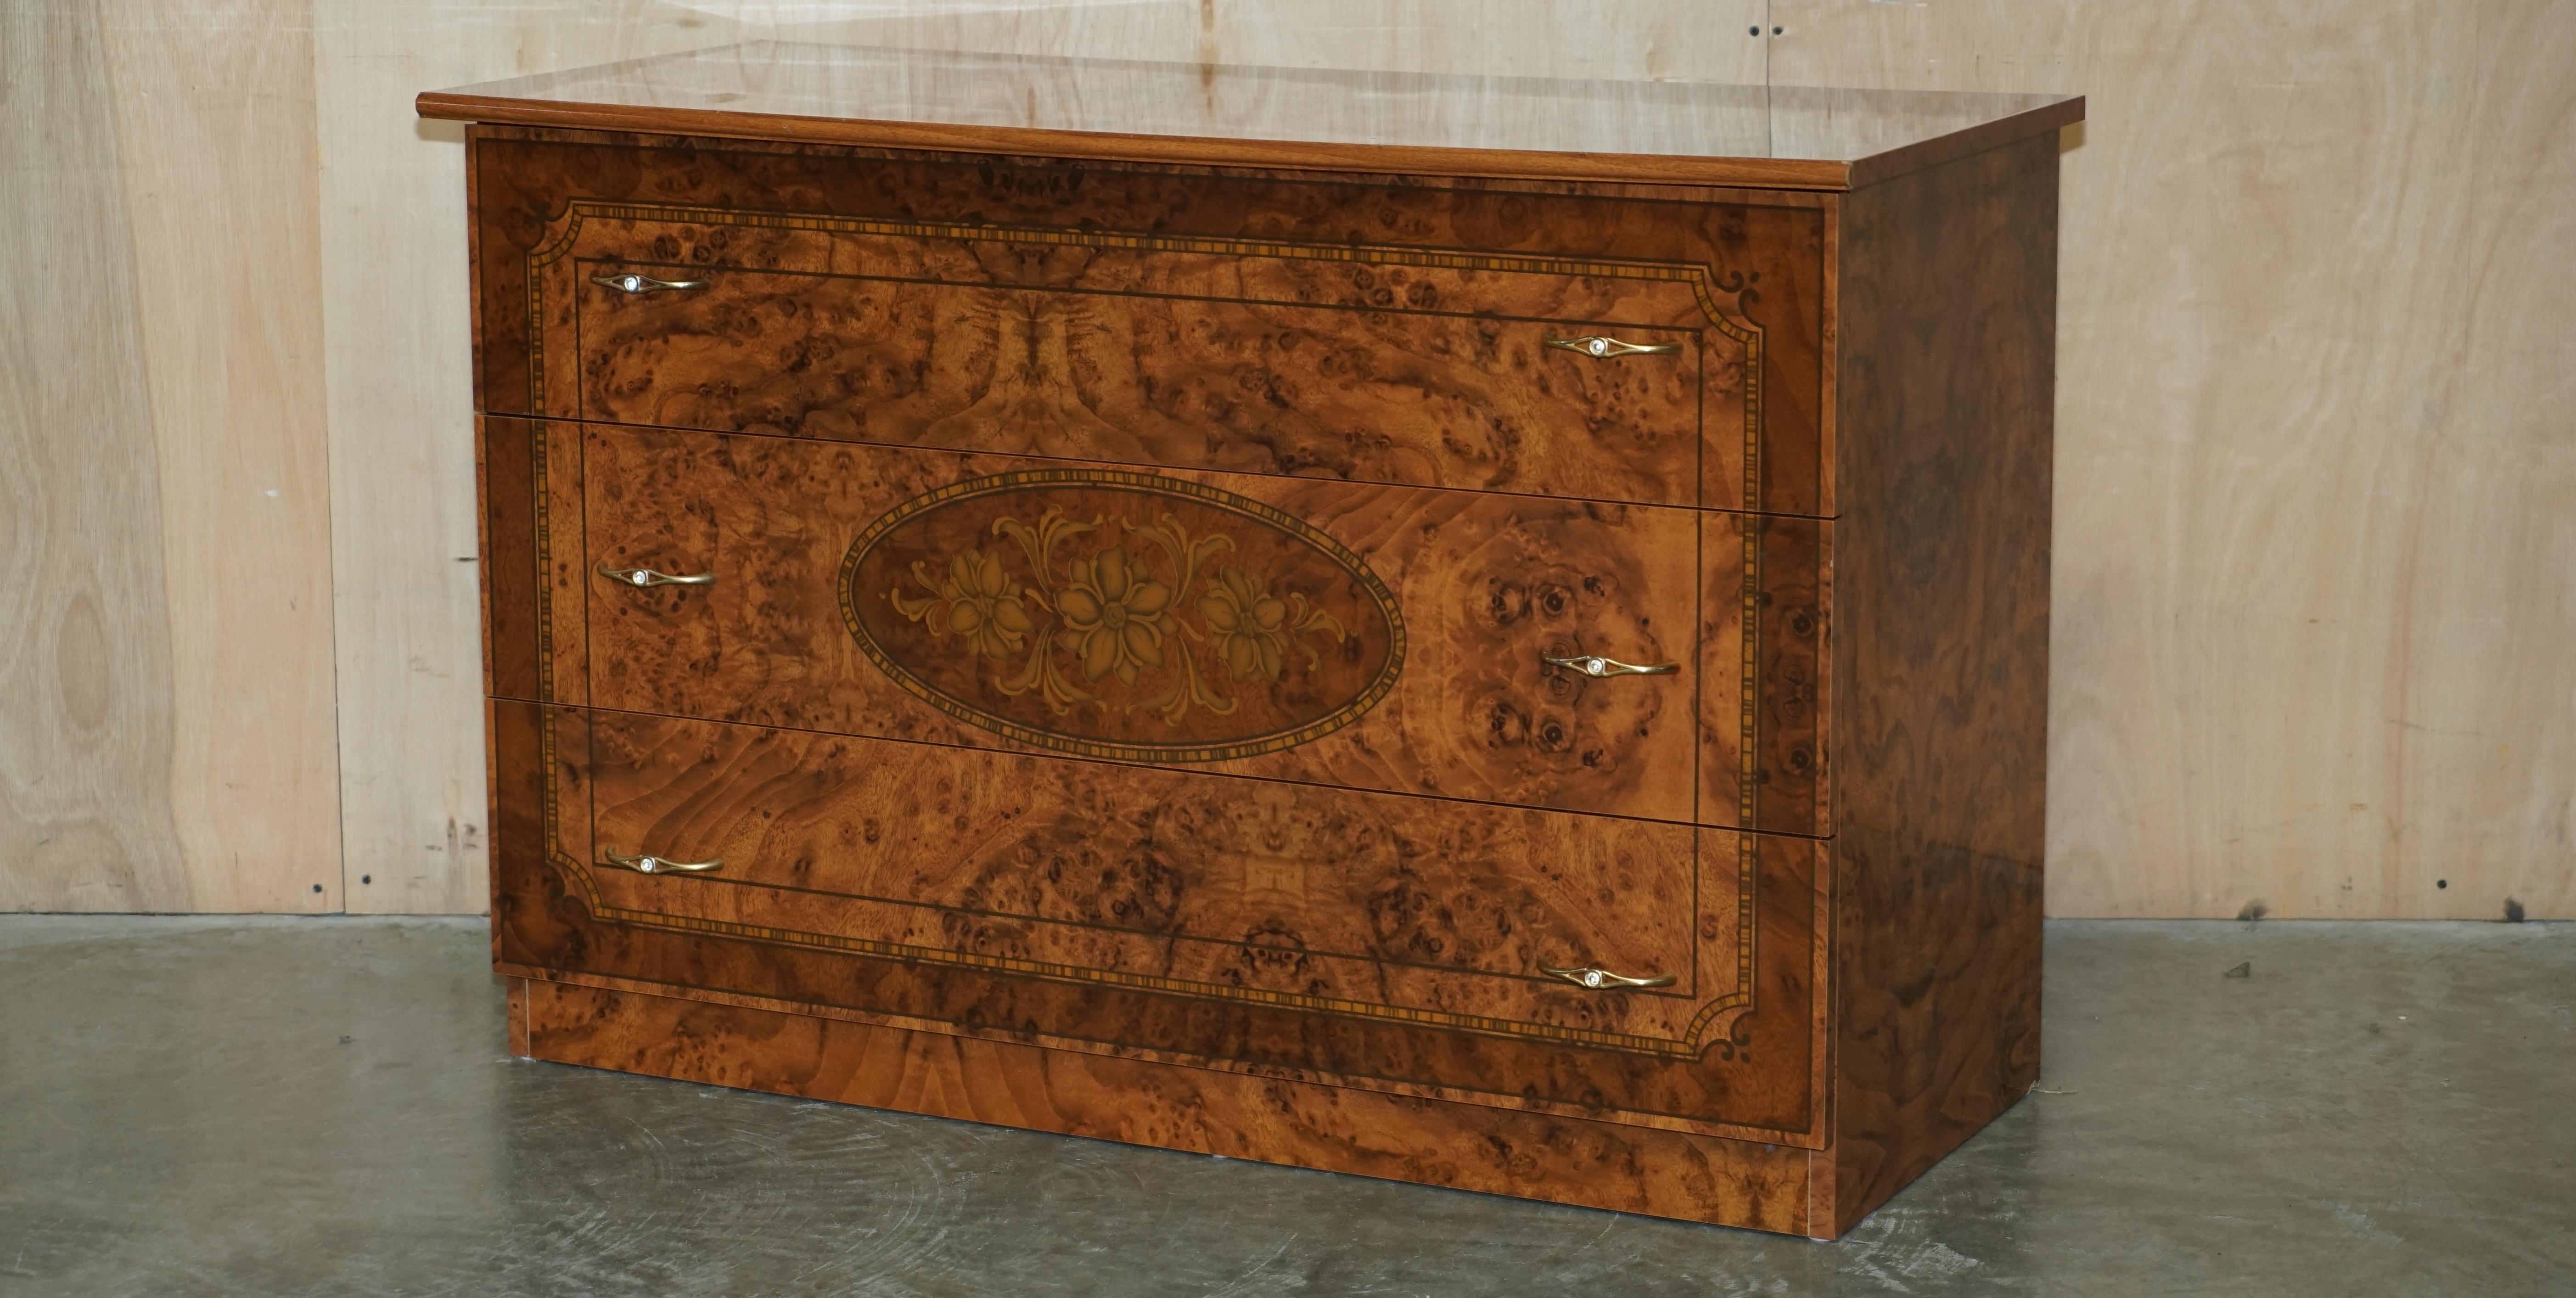 Royal House Antiques

Royal House Antiques is delighted to offer for sale this vintage made in Italy Burr Walnut veneer chest of drawers which is part of a suite

Please note the delivery fee listed is just a guide, it covers within the M25 only for